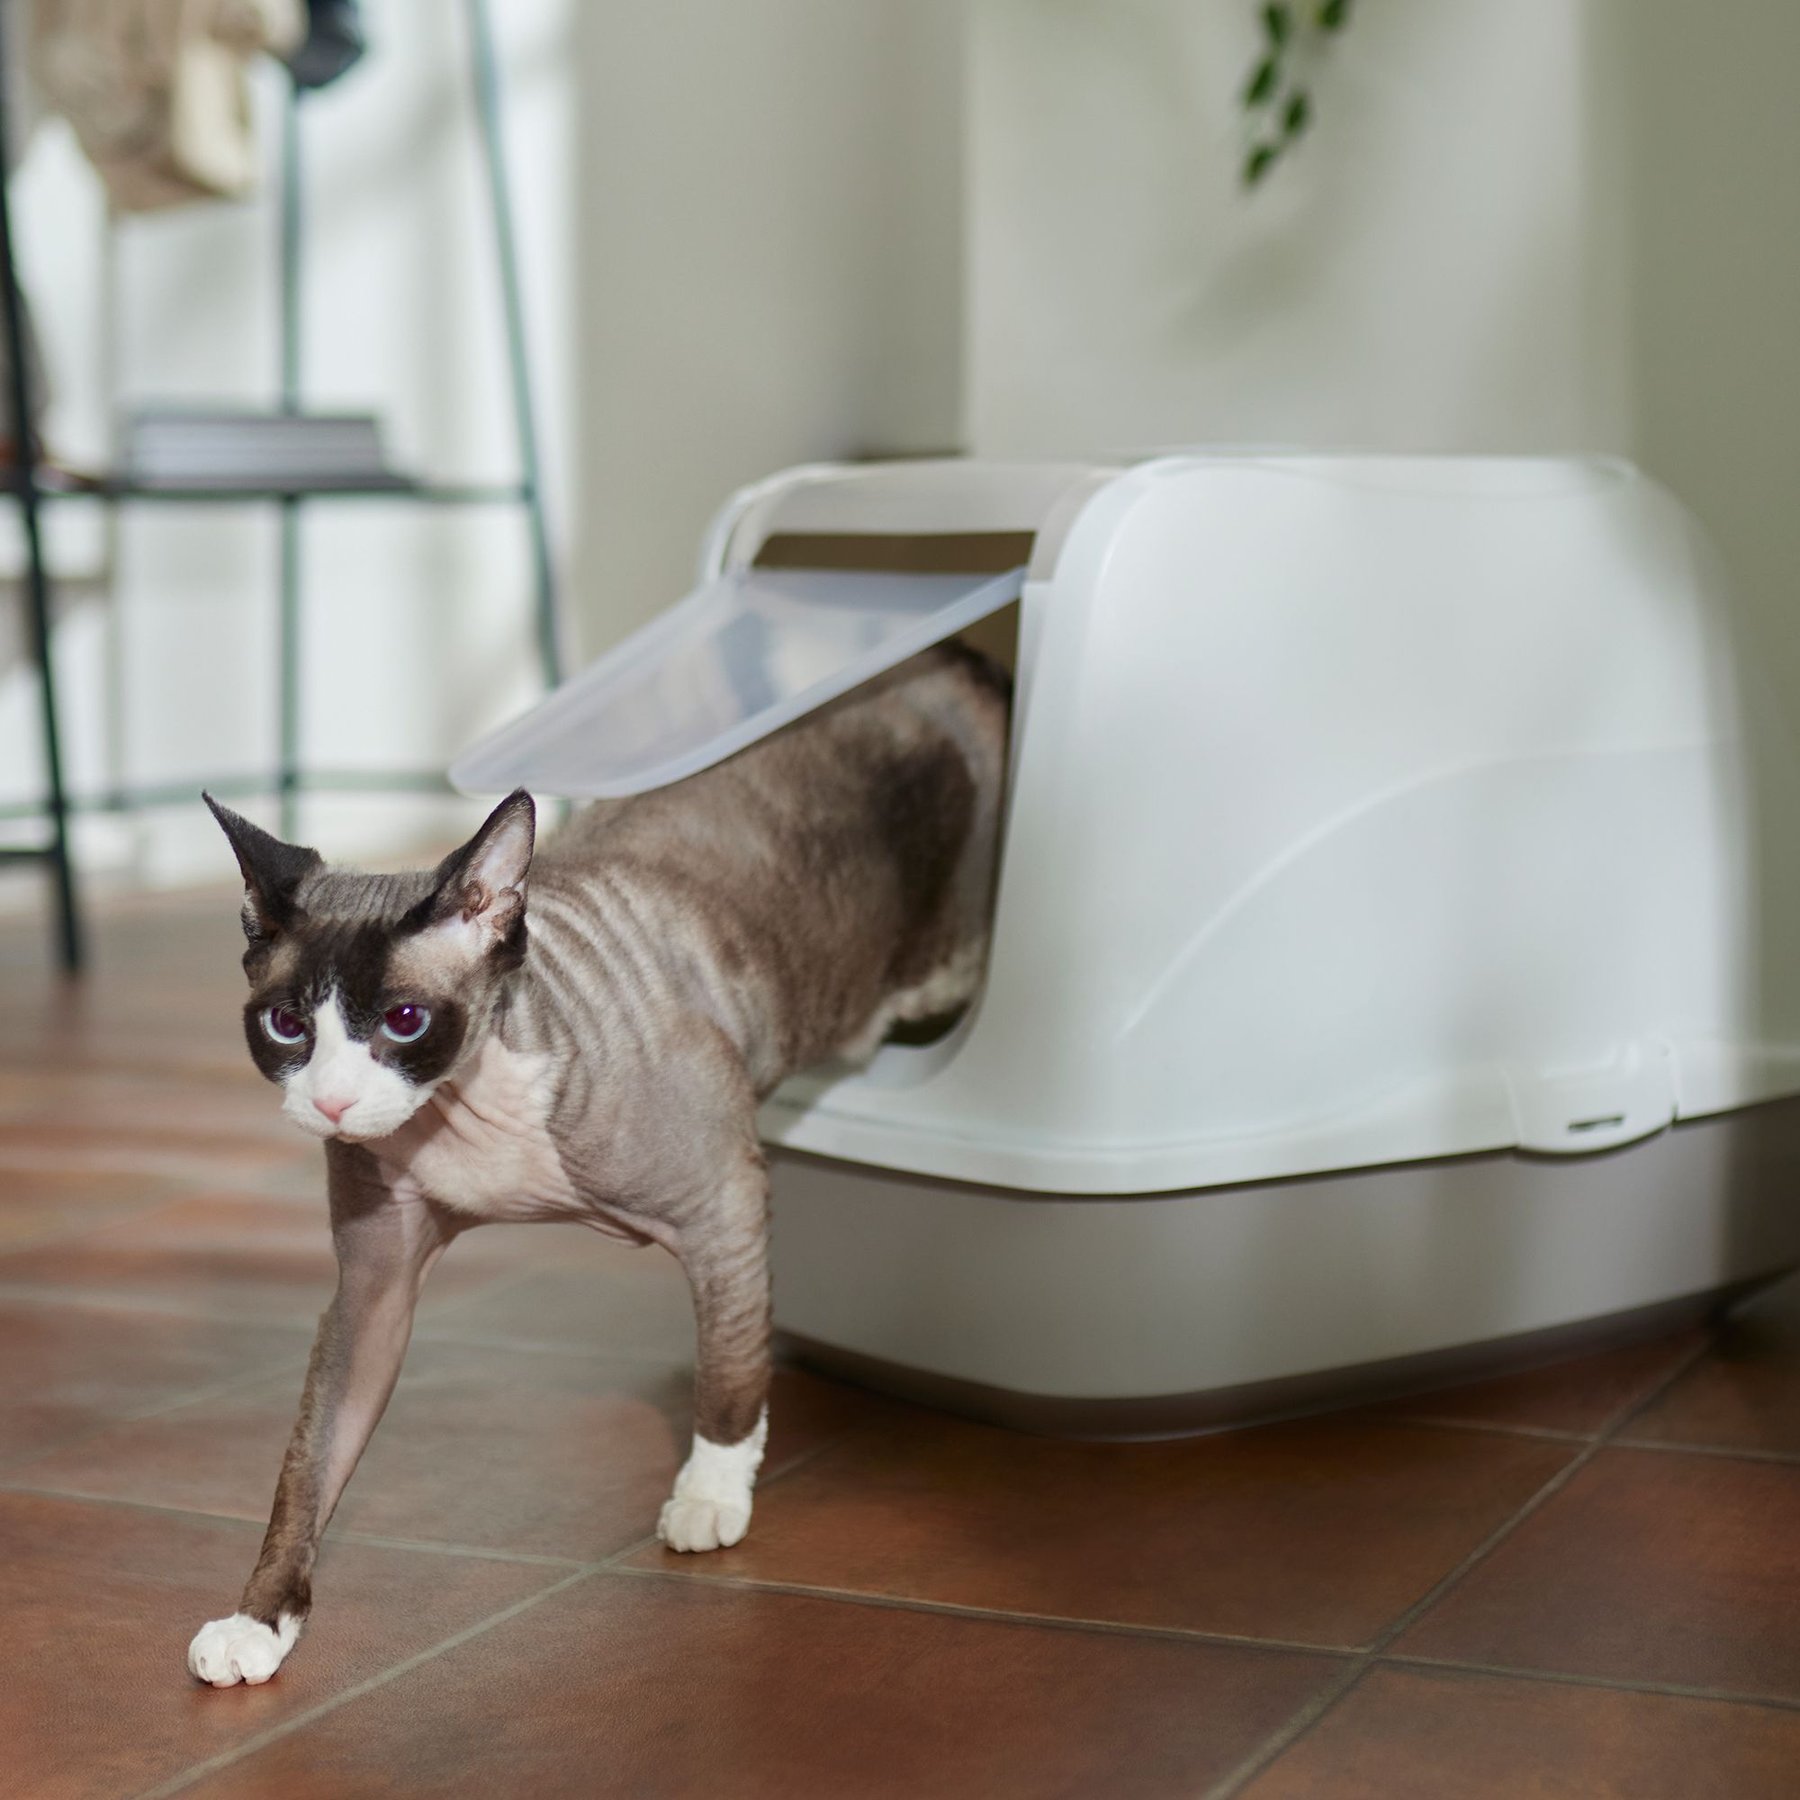 Stainless Steel Litter Box for Kittens, 4 in Height Easy Entry, Odor  Control, Non Stick, Easy to Clean,Litter Box for Rabbits, Ferrets,Guinea  Pigs and Hamsters